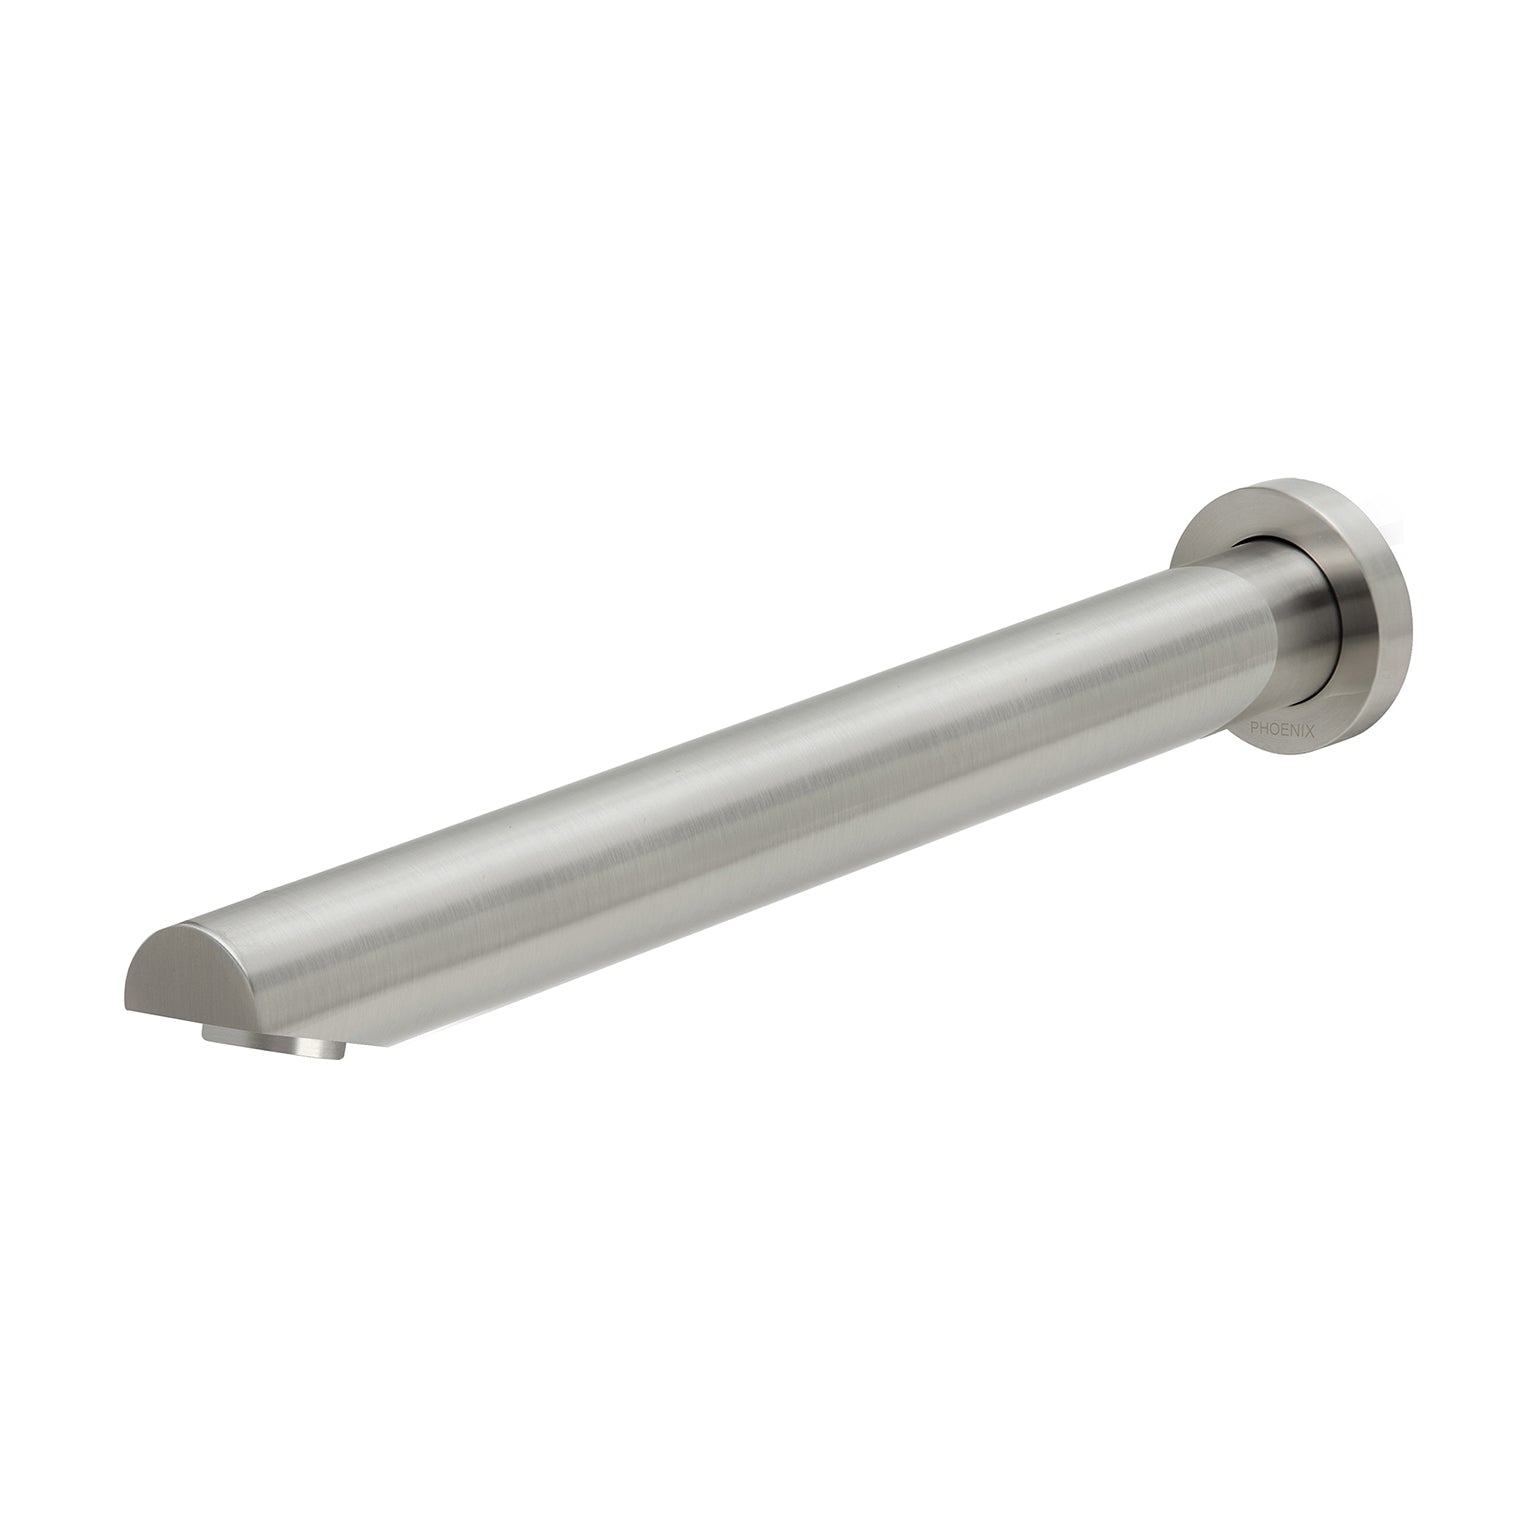 PHOENIX WALL BATH OUTLET ANGLED 32MM X 300MM BRUSHED NICKEL